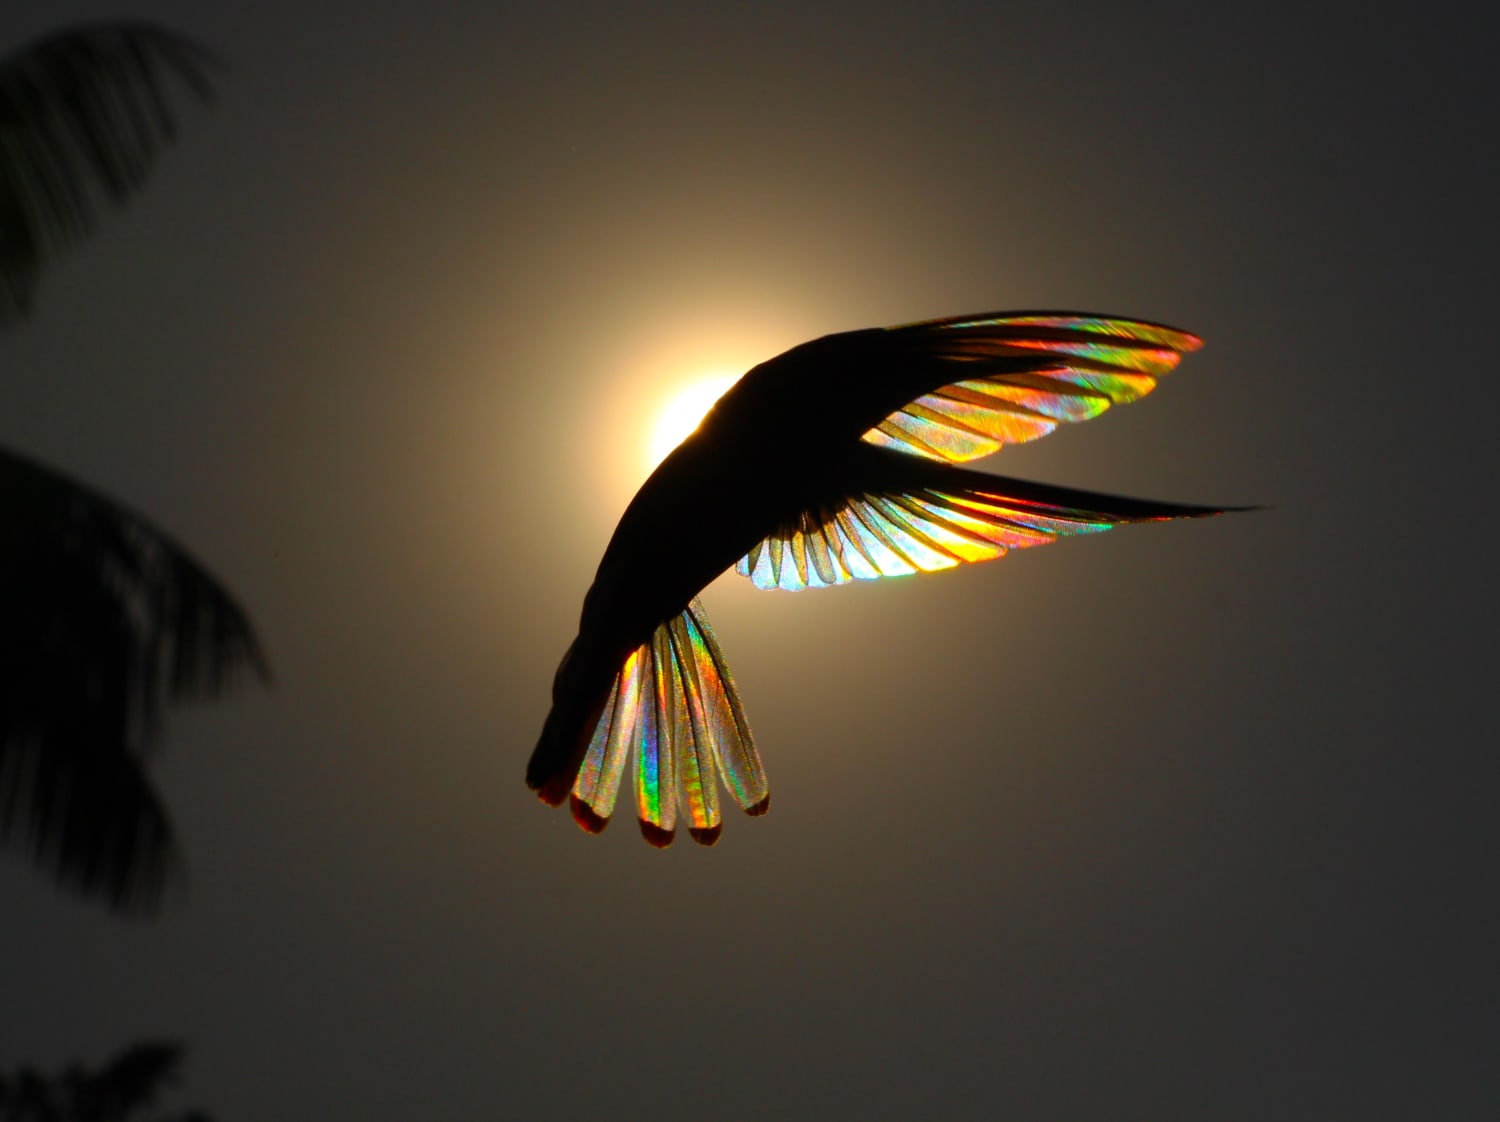 Jacobin hummingbird hovers in front of the rising Sun